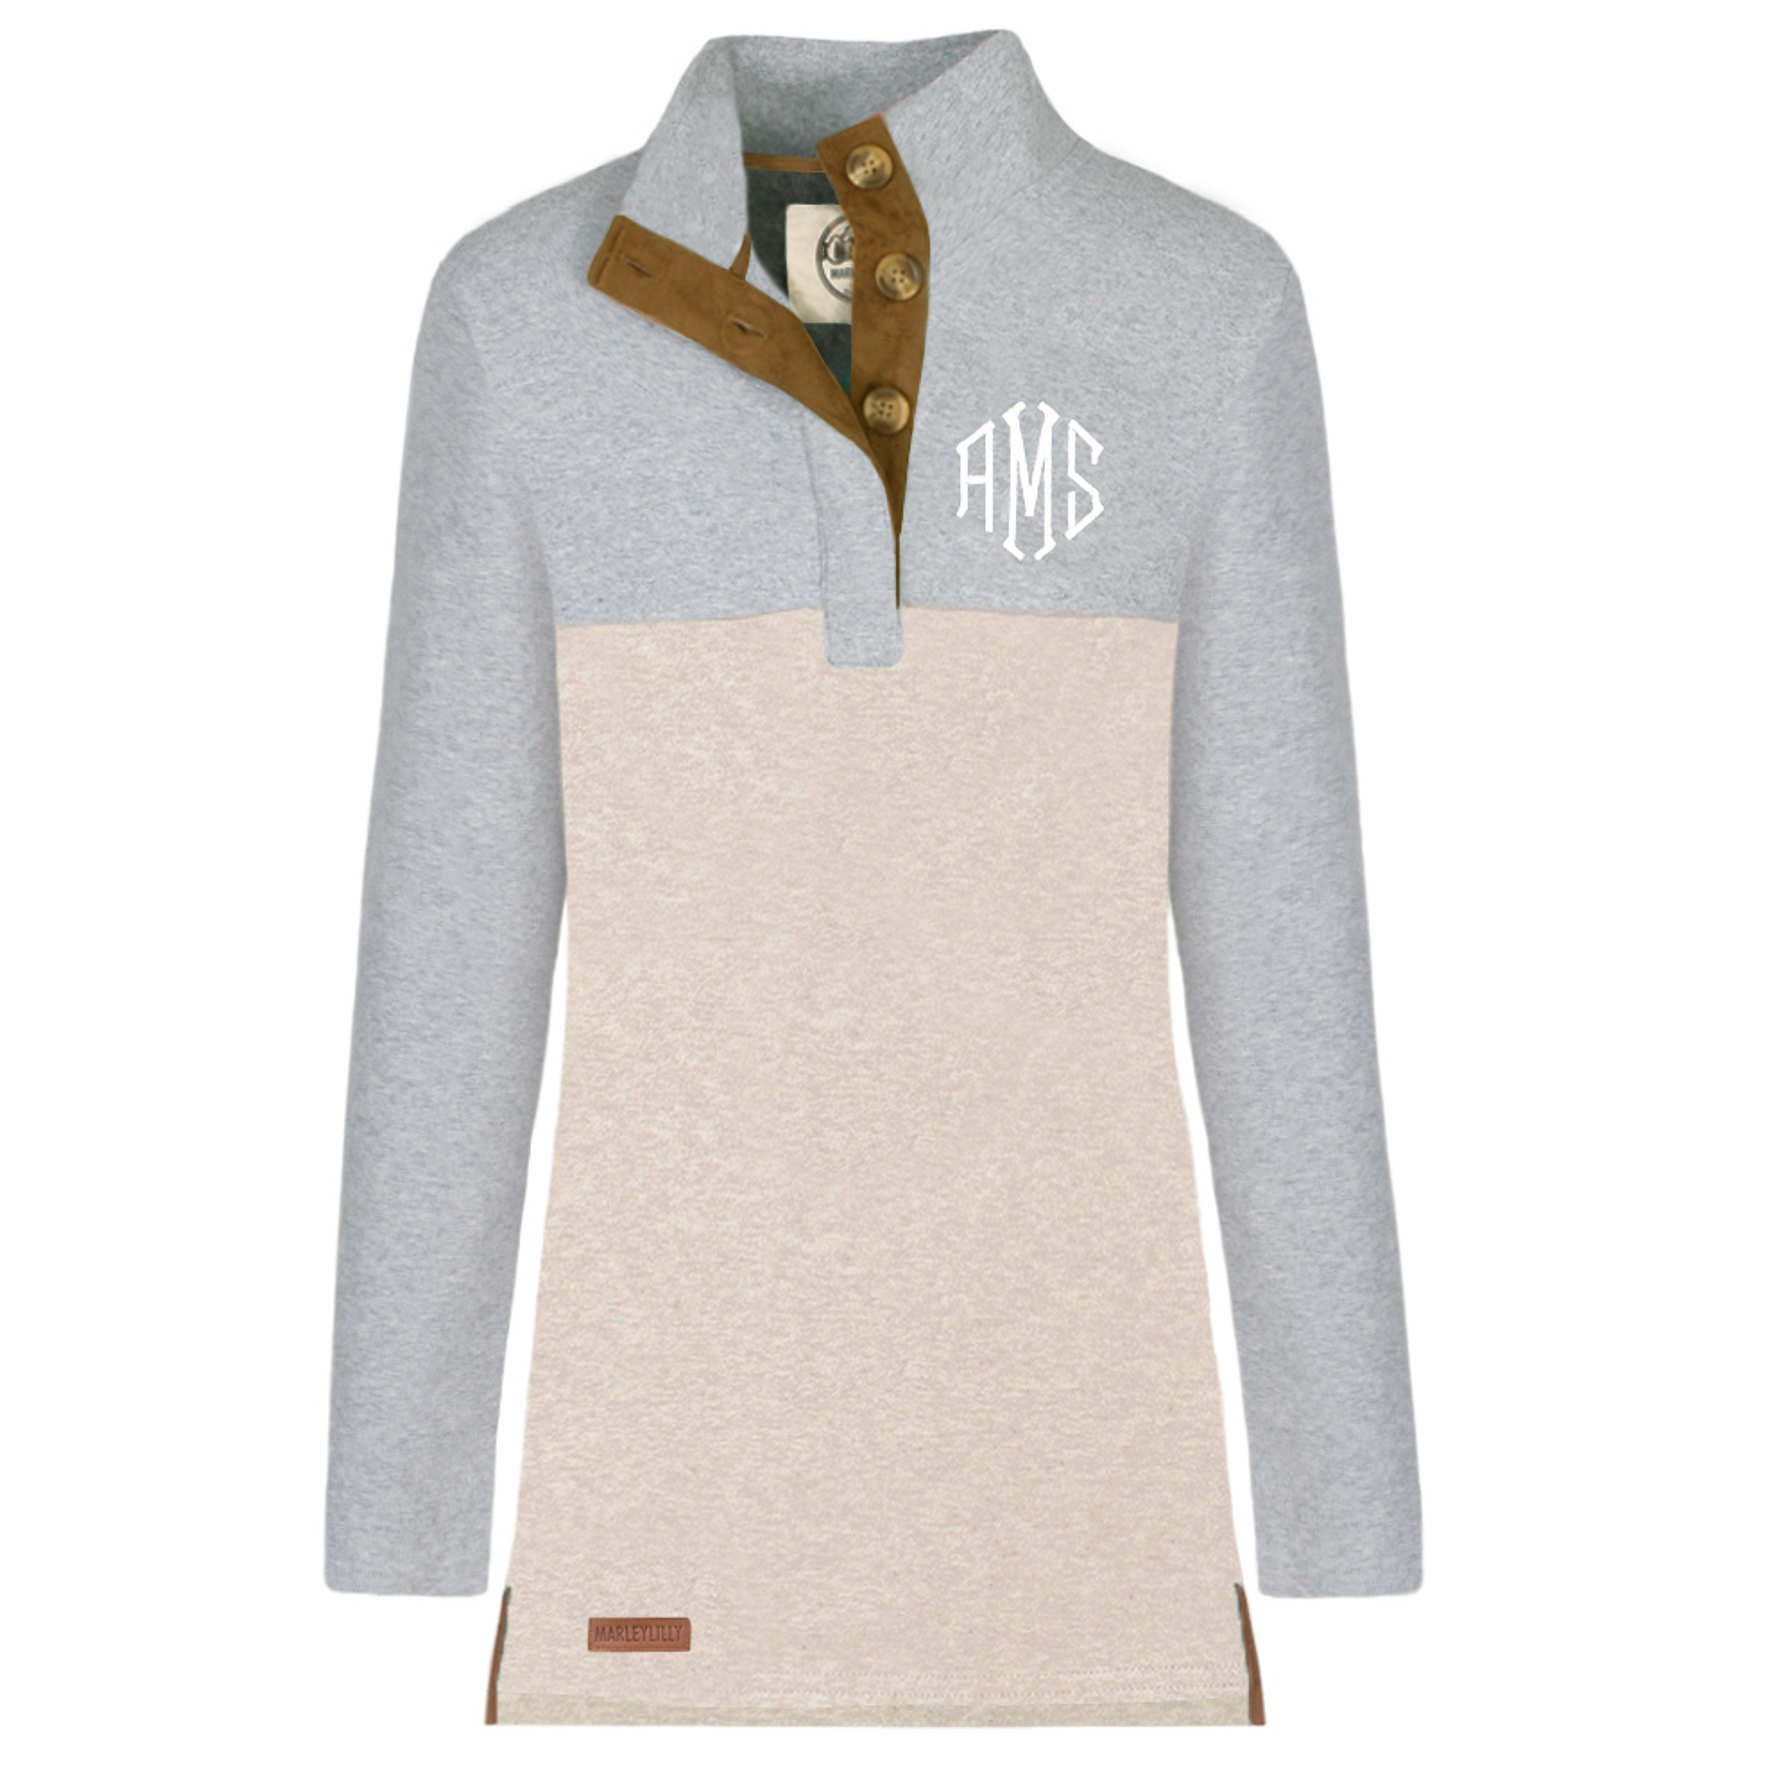 Monogrammed Popover Sweater Tunic - Marleylilly